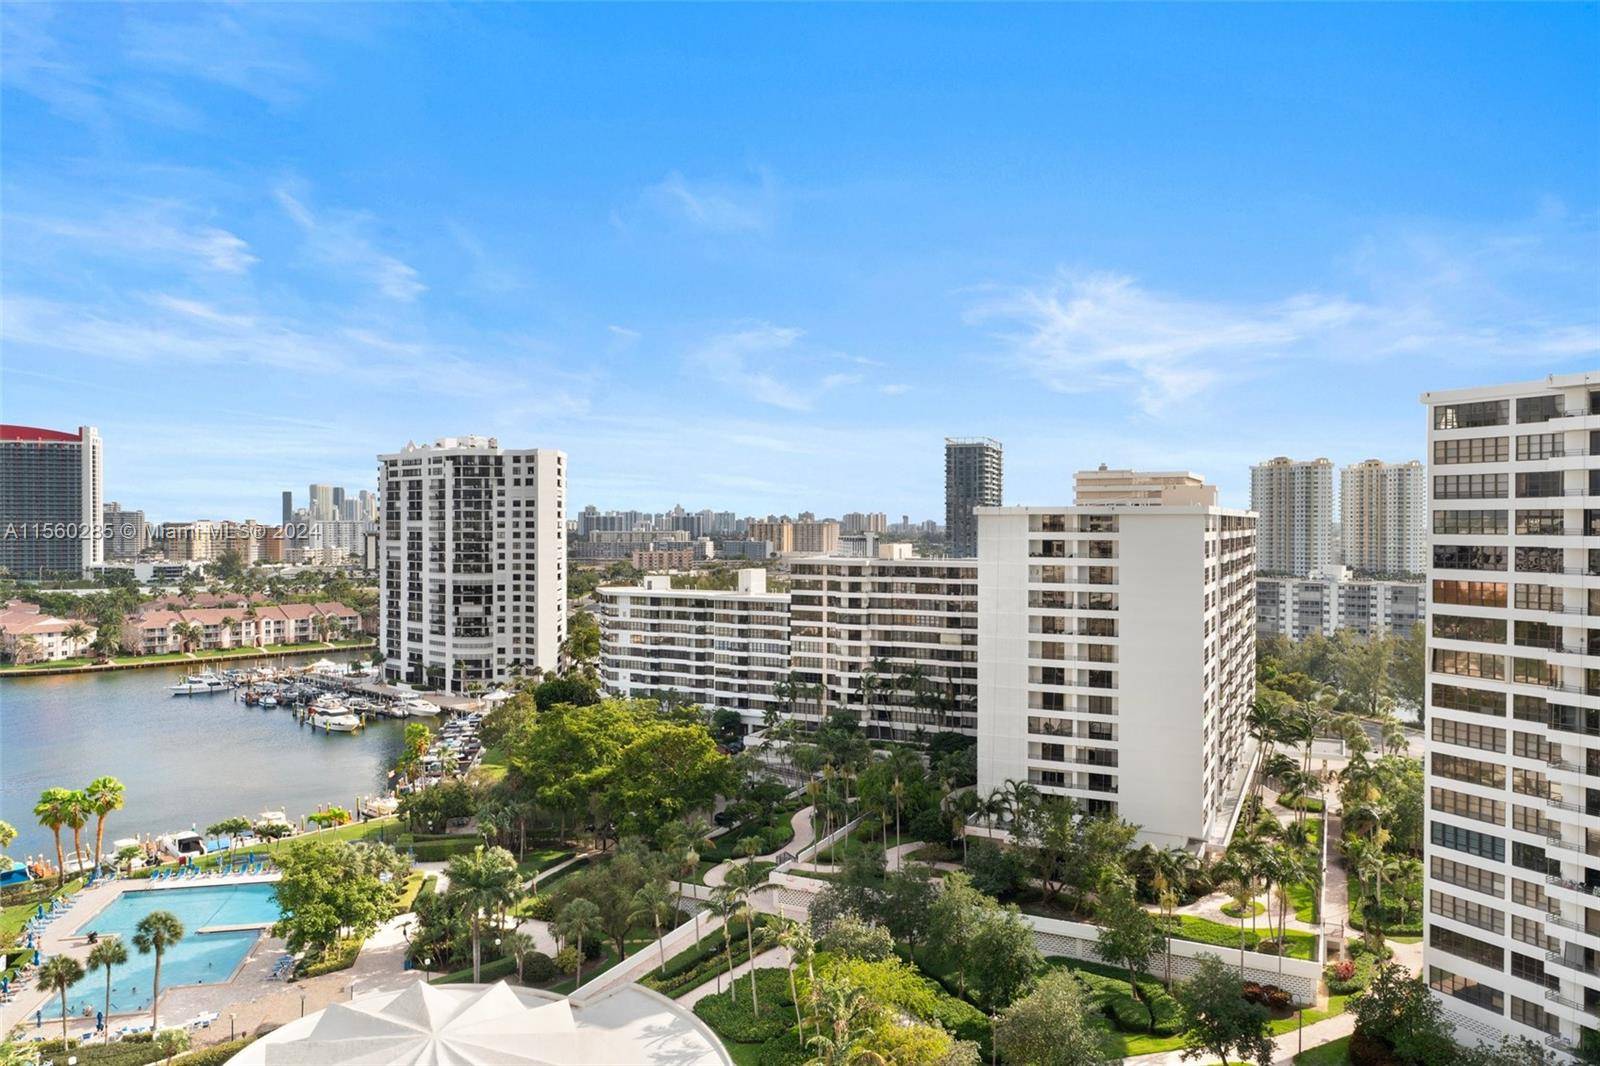 Completely remodeled 2 bedroom 2 bath corner unit with huge rooms boasting picturesque views of the marina, pool, intracoastal waterways and city views from its wall to wall windows and ...